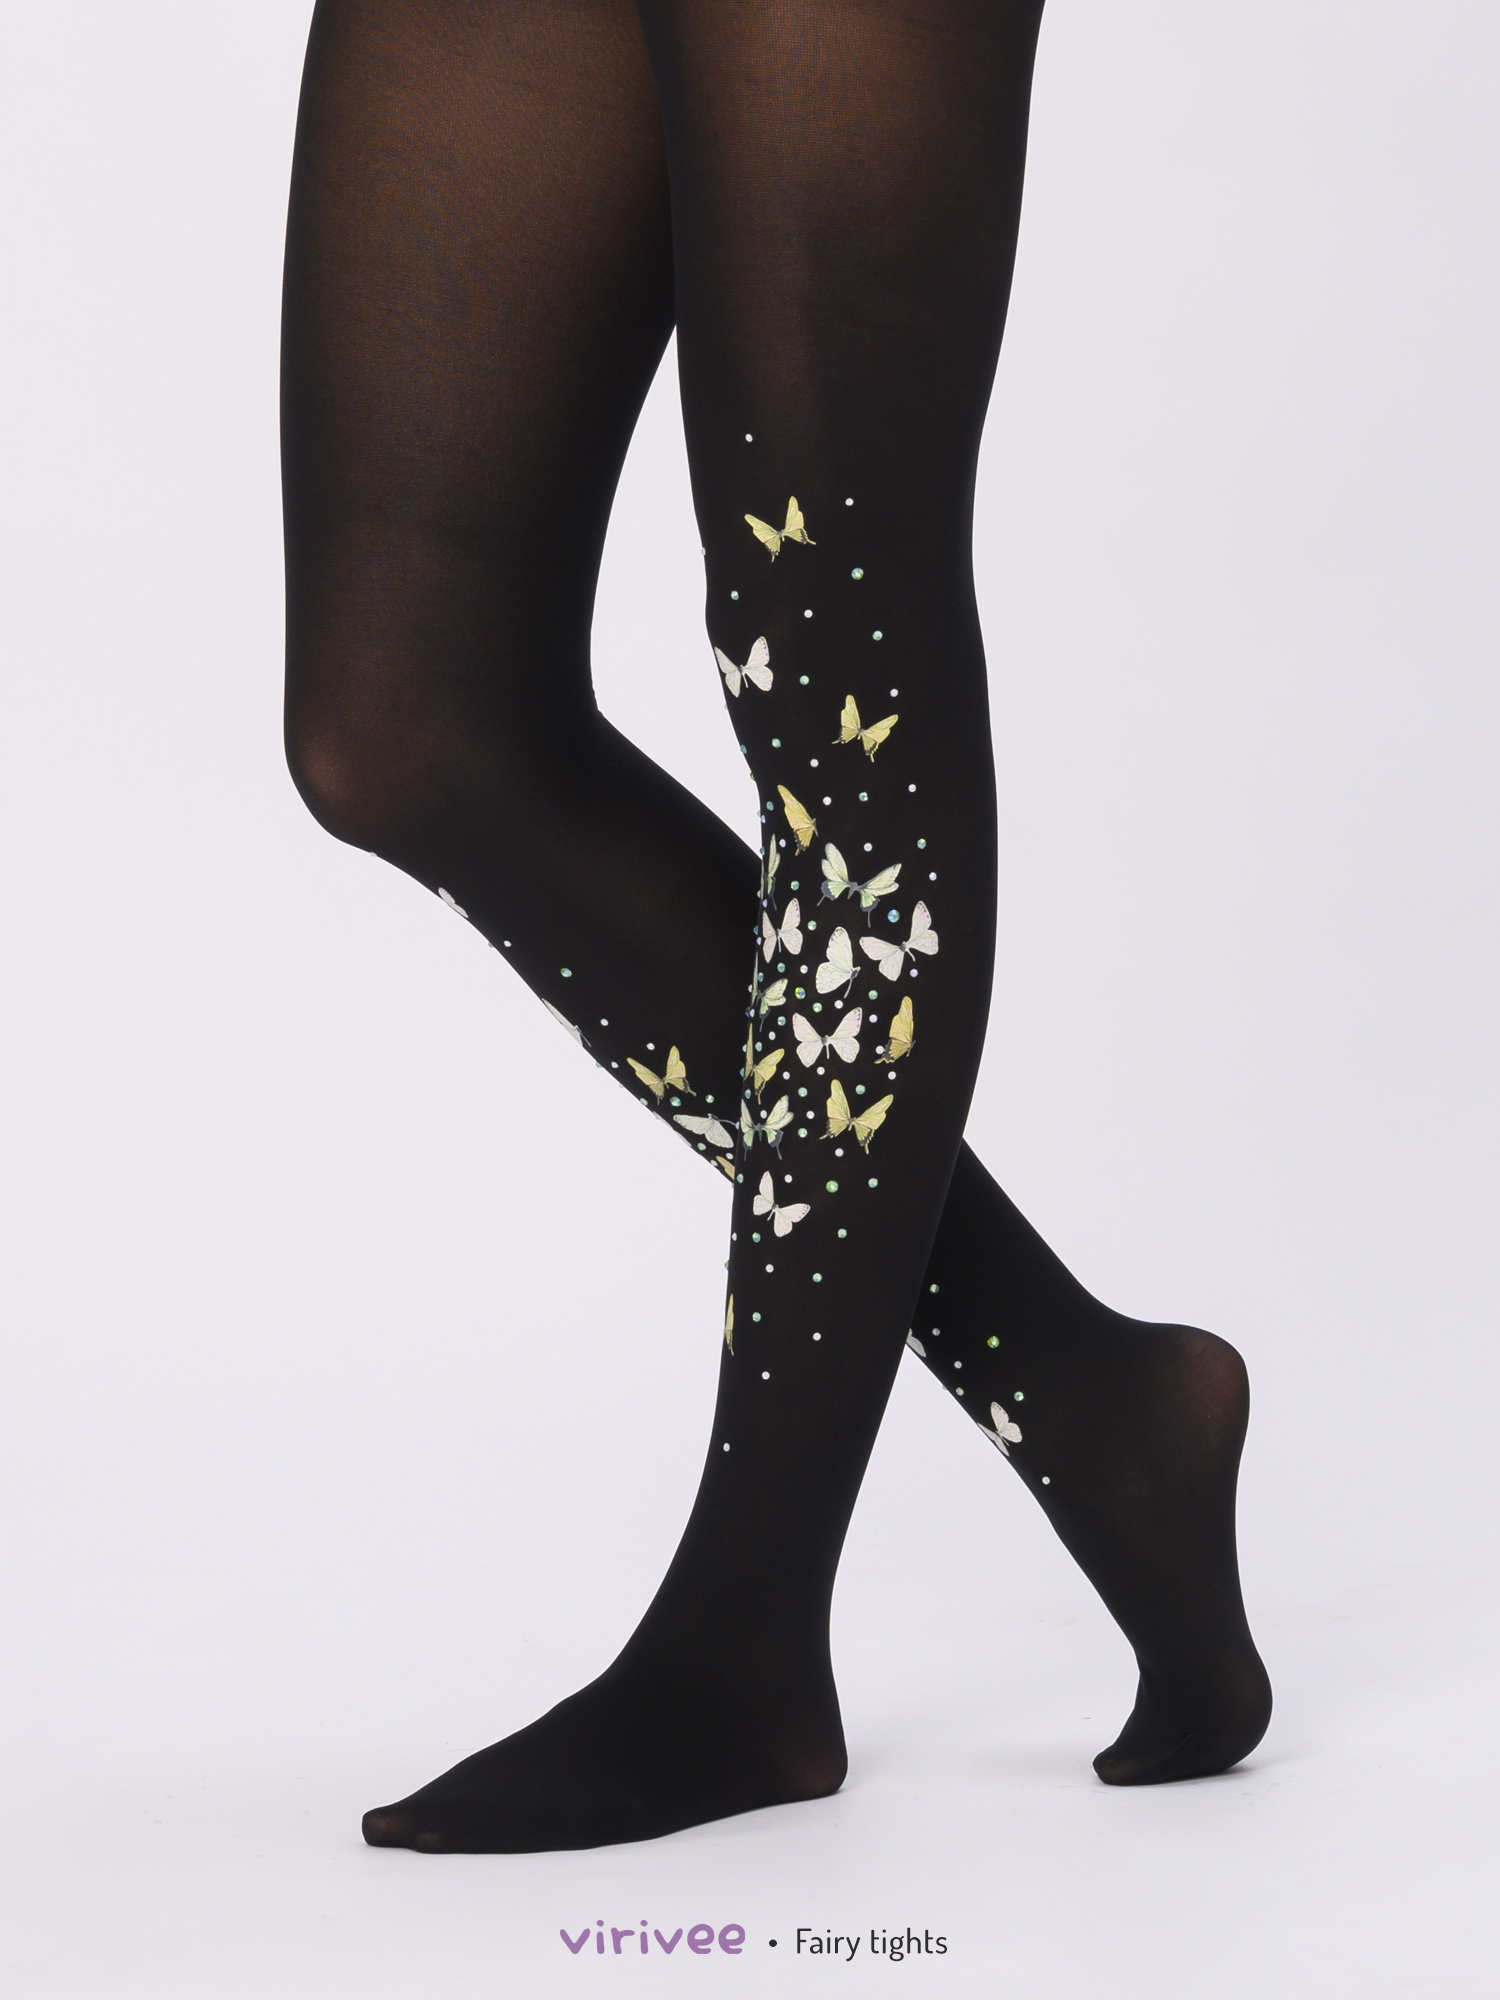 Golden beetle tights - Virivee Tights - Unique tights designed and